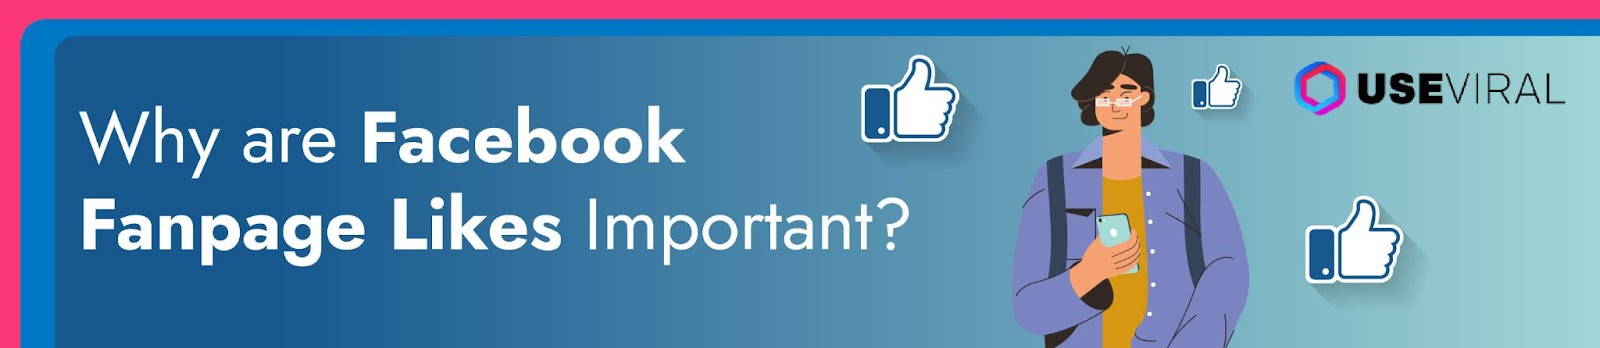 Why are Facebook Fanpage Likes Important? 